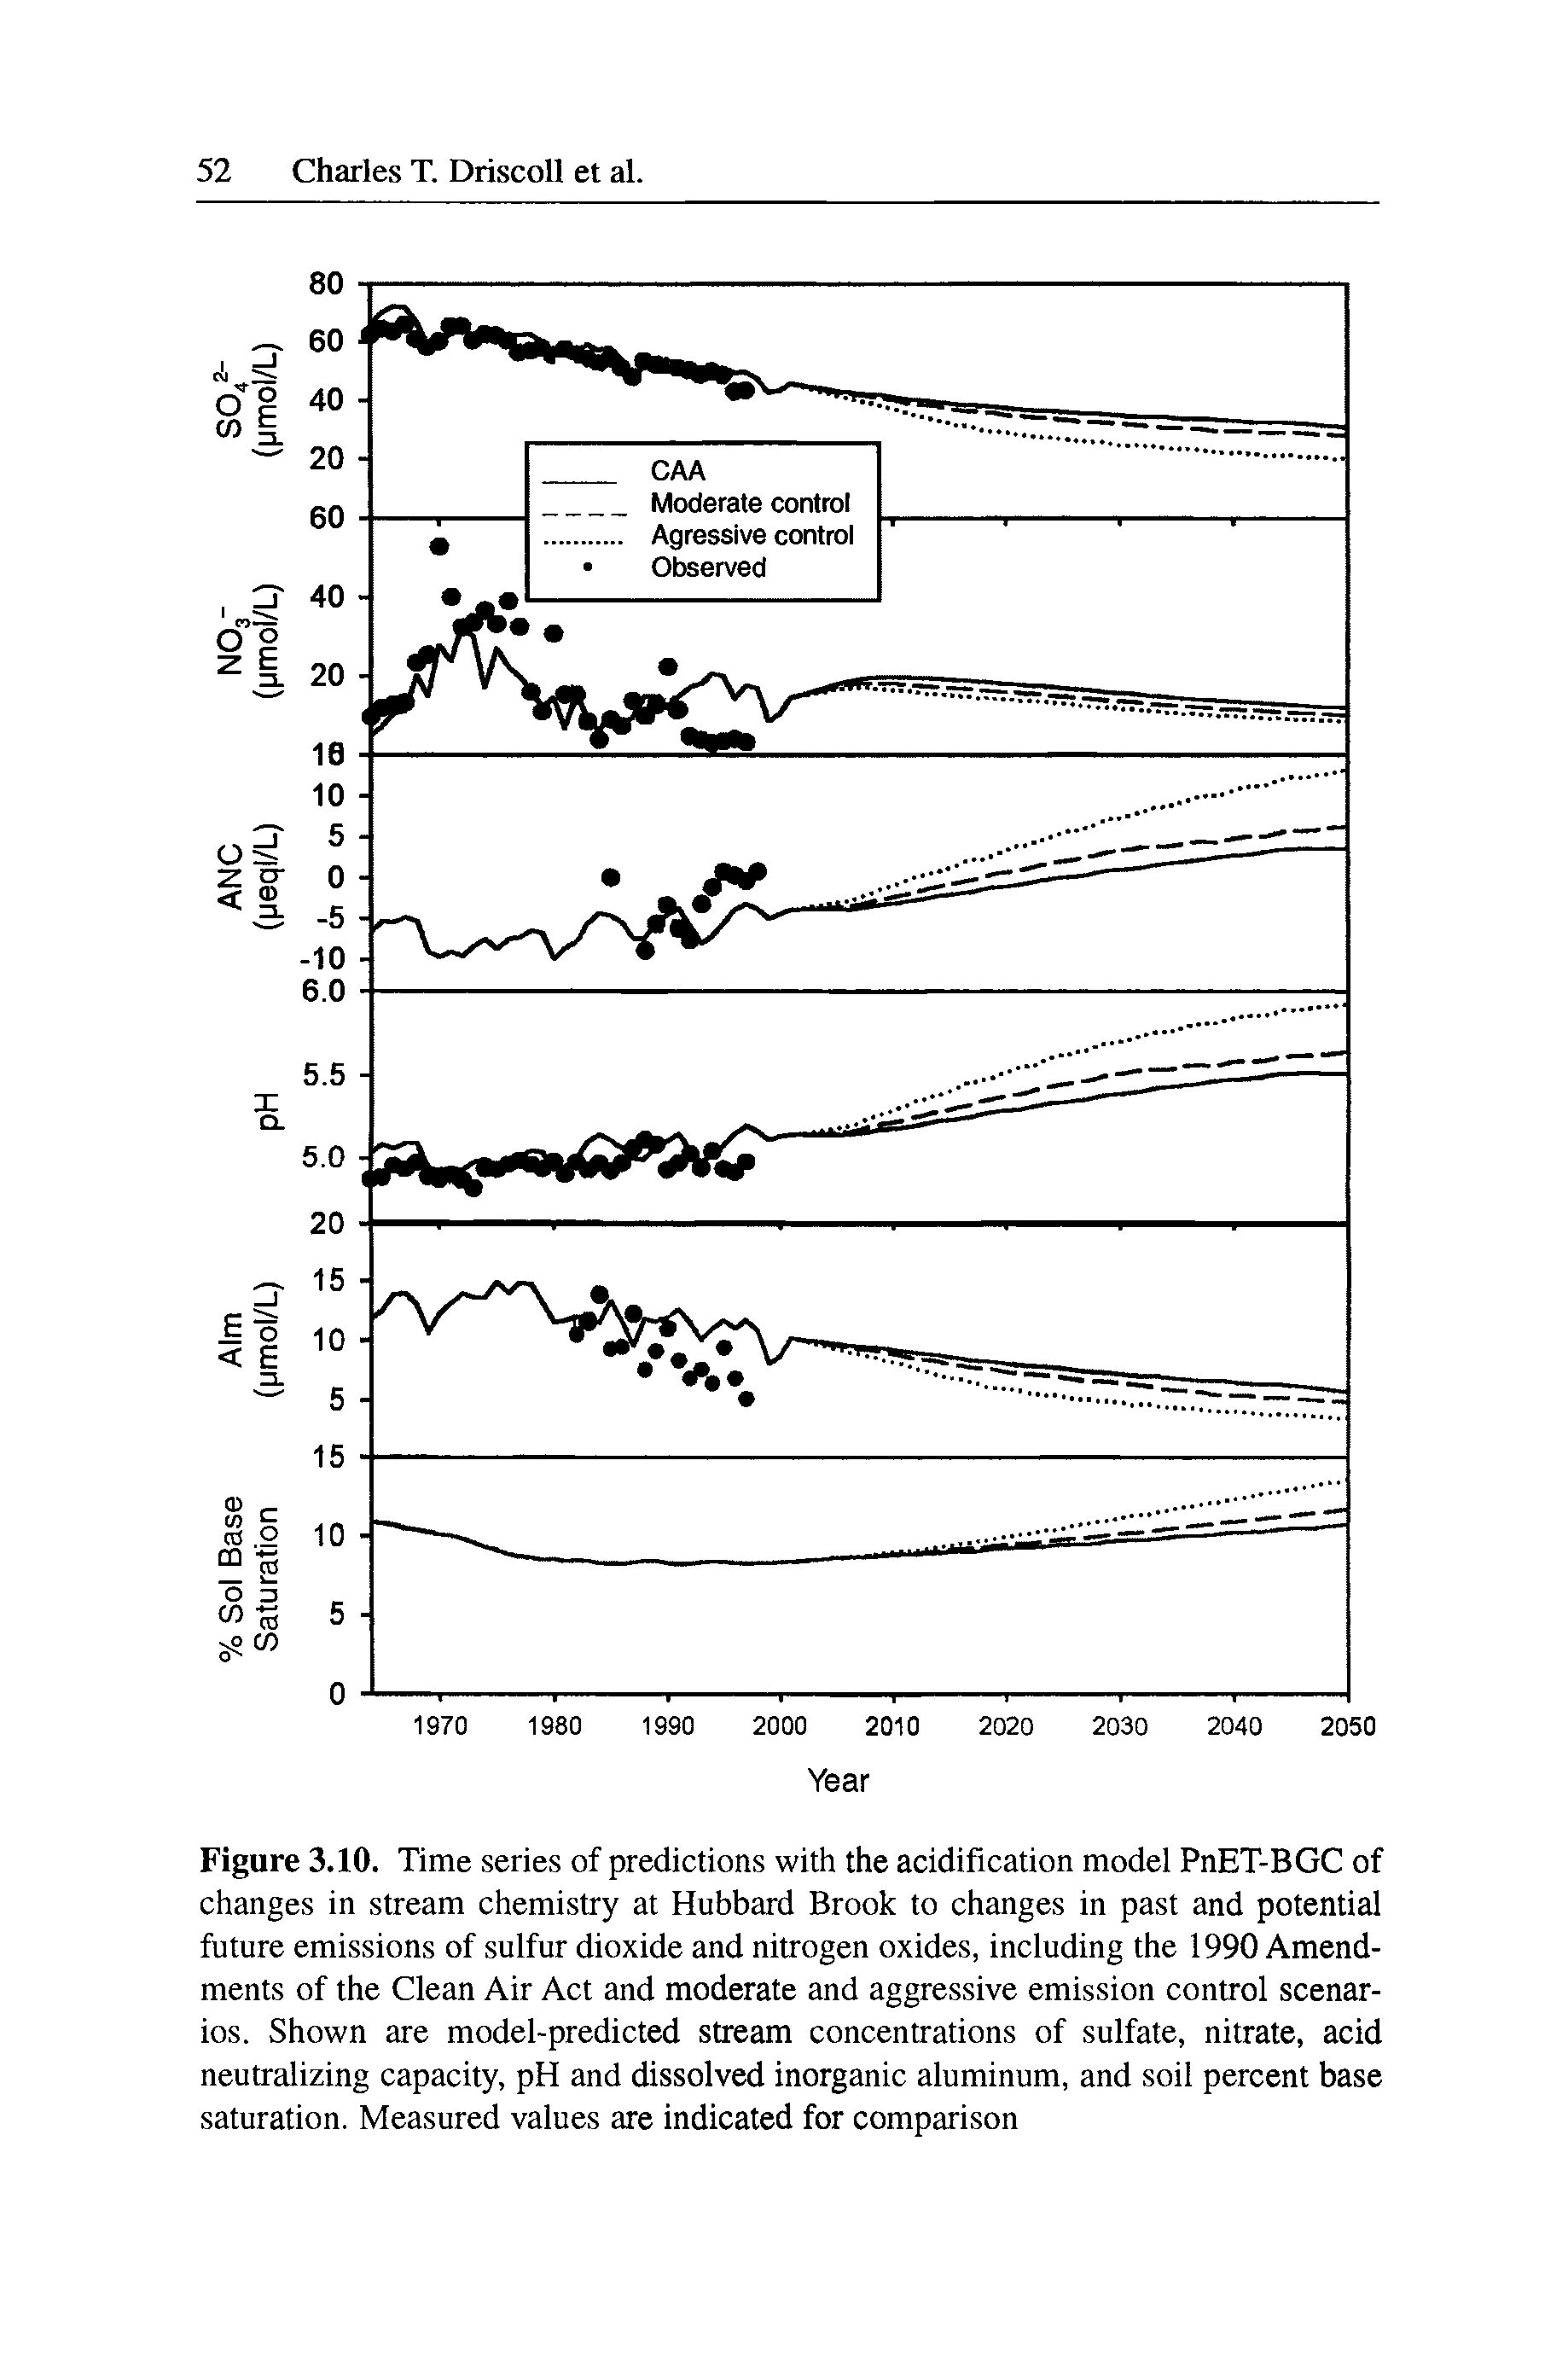 Figure 3.10. Time series of predictions with the acidification model PnET-BGC of changes in stream chemistry at Hubbard Brook to changes in past and potential future emissions of sulfur dioxide and nitrogen oxides, including the 1990 Amendments of the Clean Air Act and moderate and aggressive emission control scenarios. Shown are model-predicted stream concentrations of sulfate, nitrate, acid neutralizing capacity, pH and dissolved inorganic aluminum, and soil percent base saturation. Measured values are indicated for comparison...